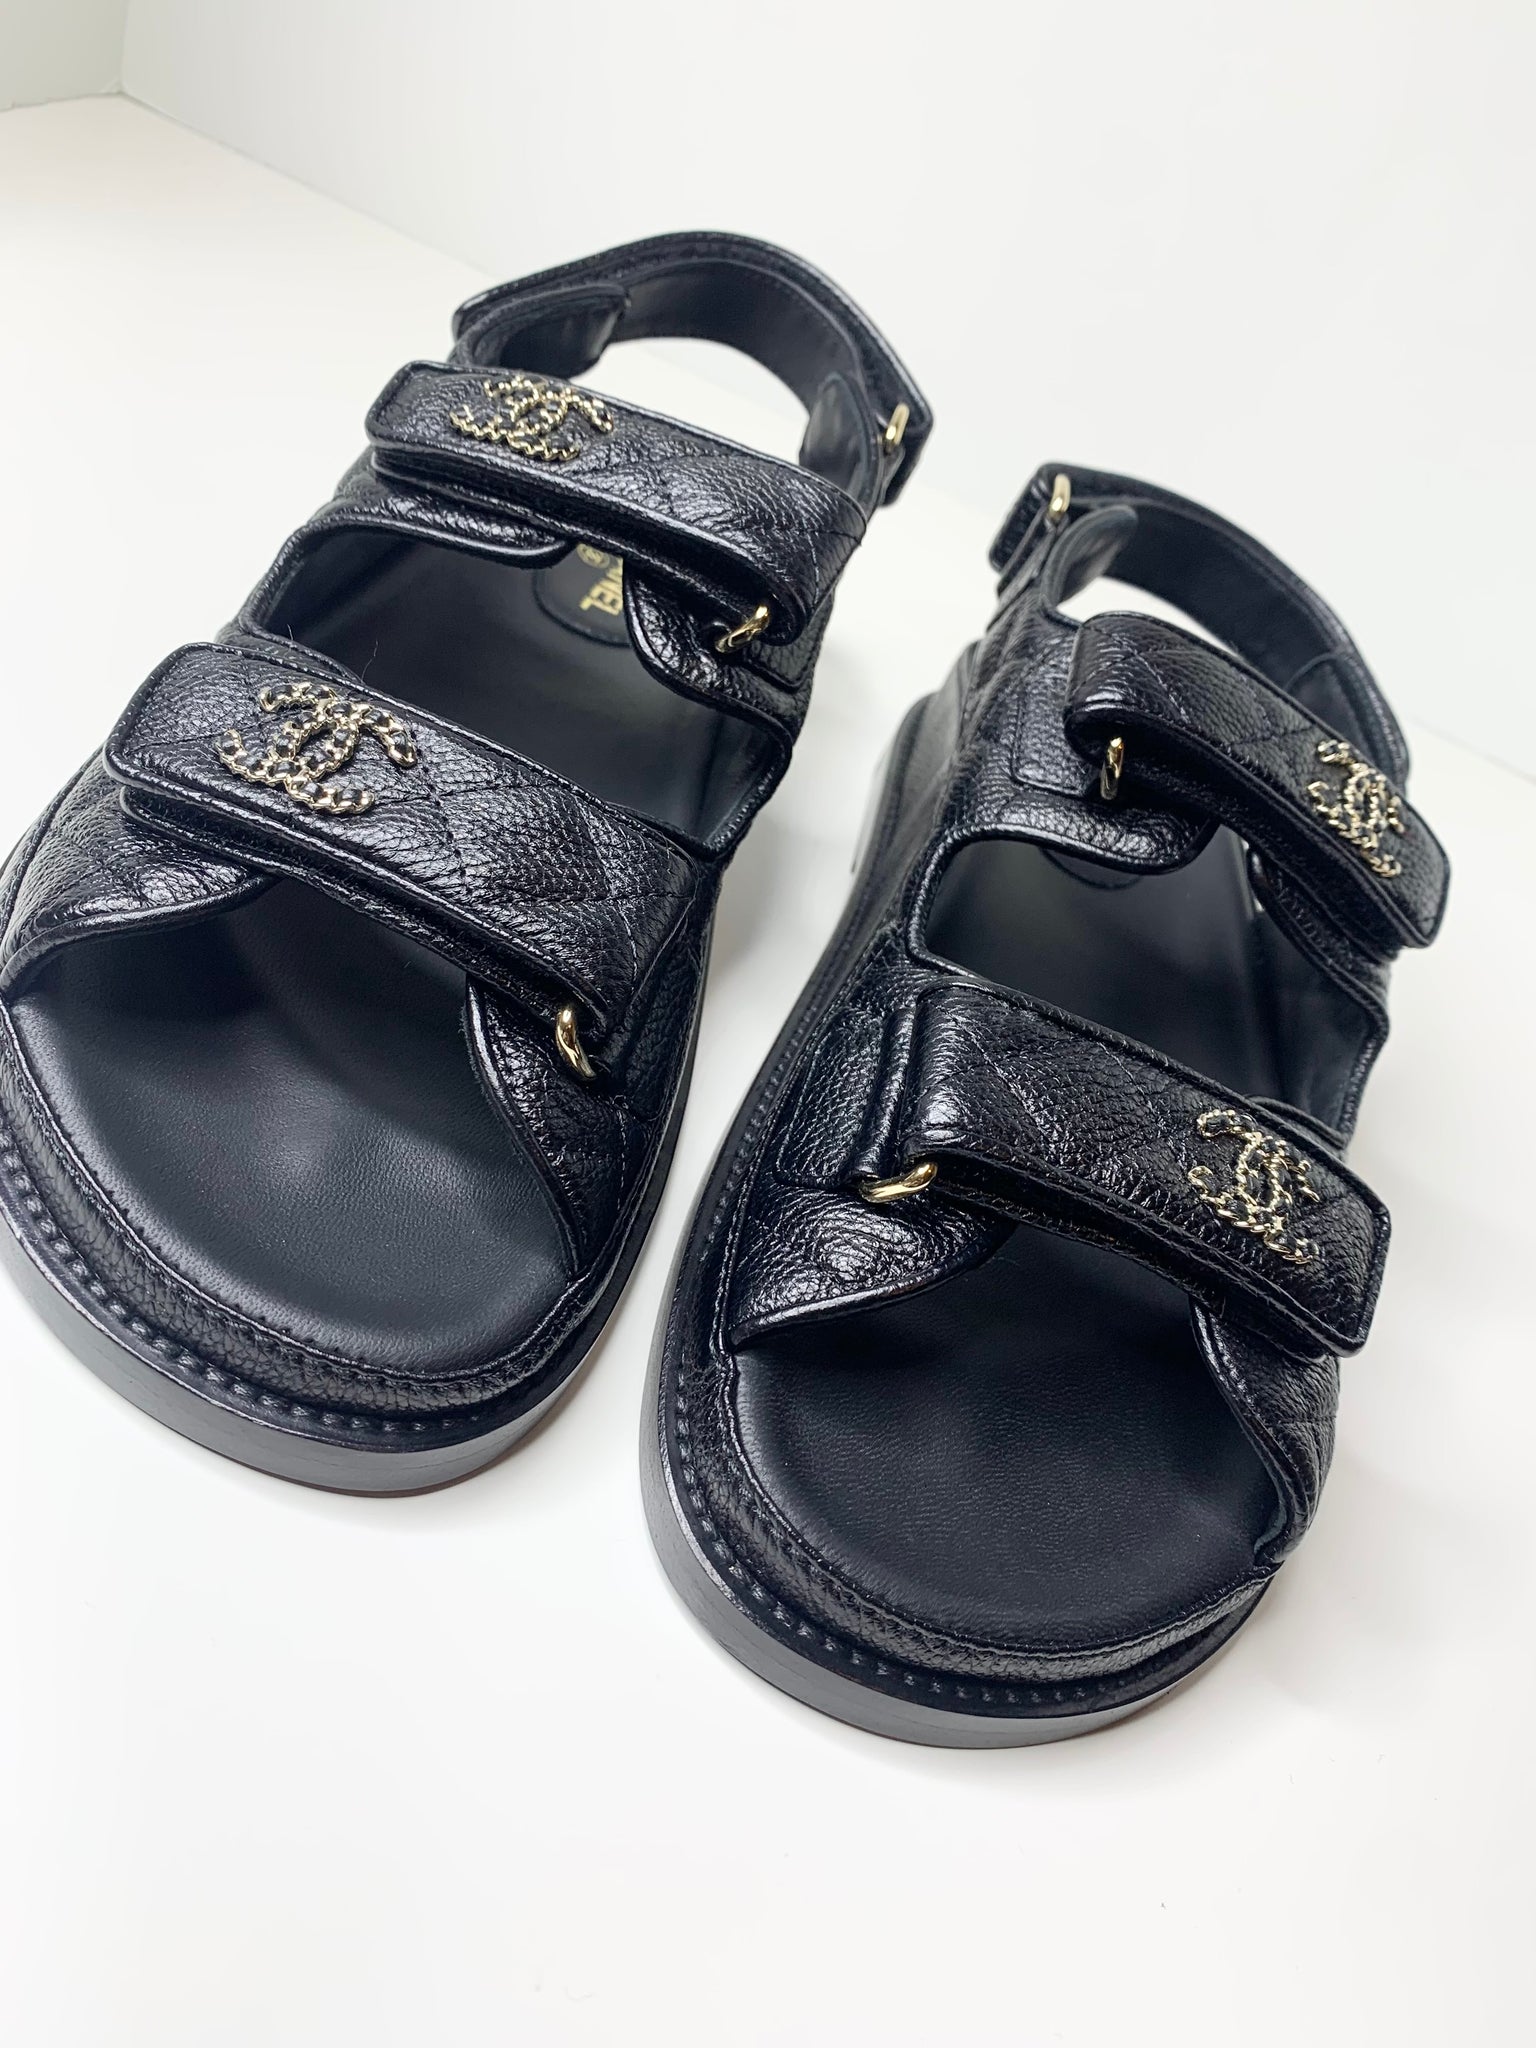 Dad sandals leather sandals Chanel Black size 37 IT in Leather - 30424329